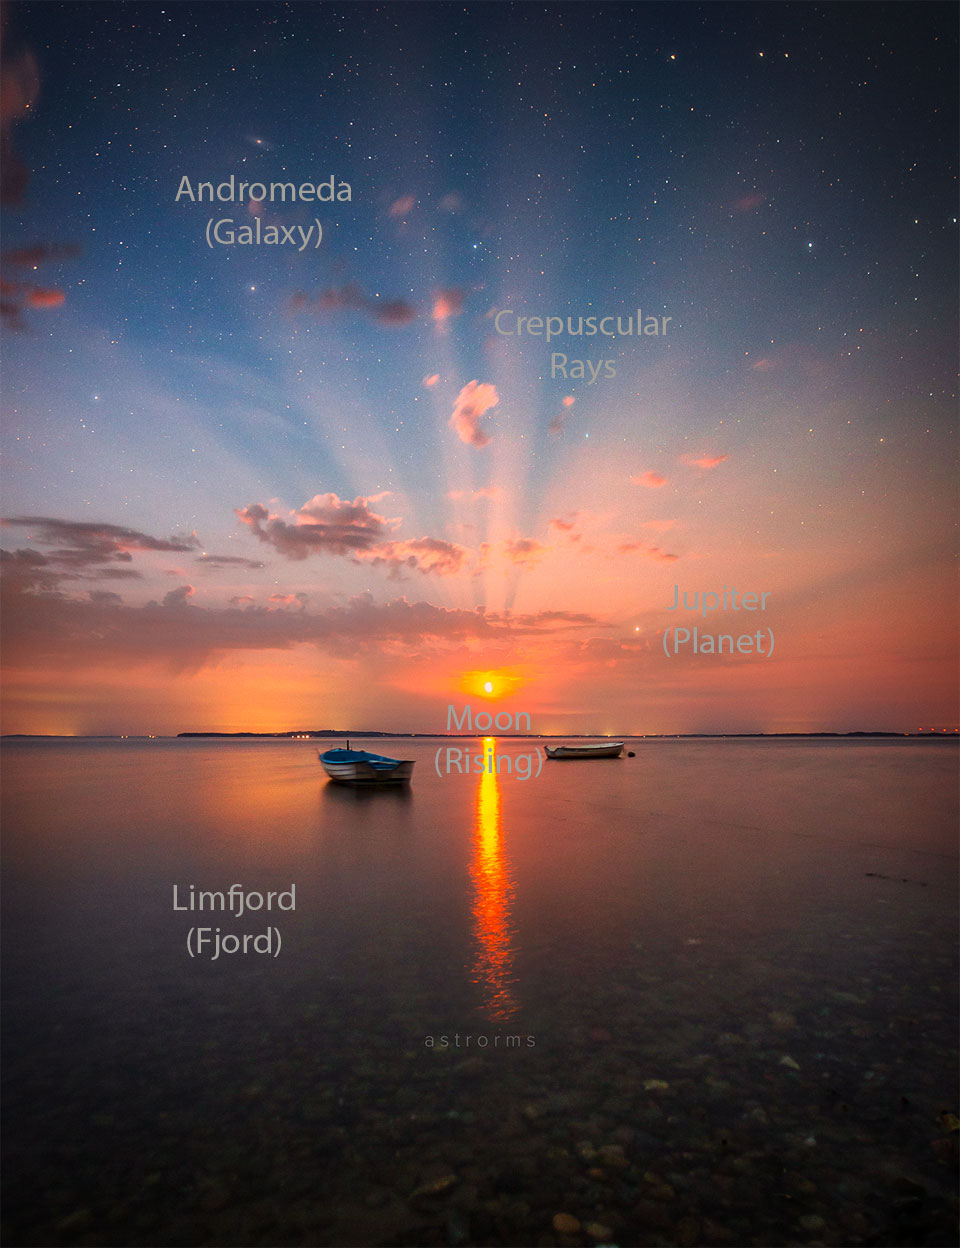 The featured image shows the Moon rising over water surrounded by
bright rays that peek through clouds.
Please see the explanation for more detailed information.